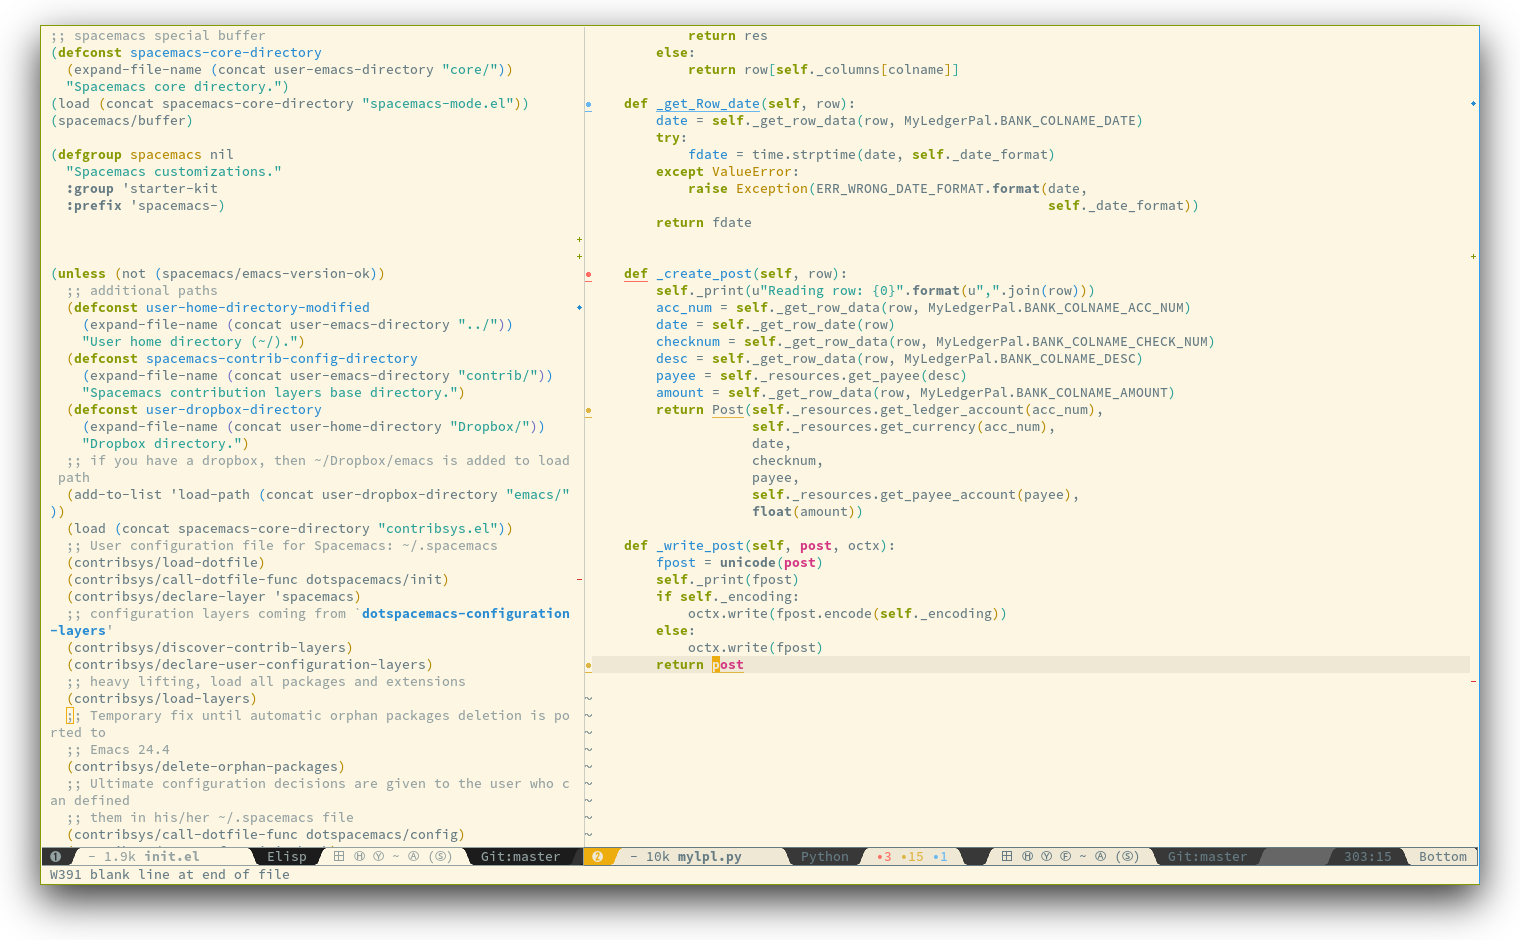 /TakeV/spacemacs/media/commit/d1bb779340fadfe5f1d4cacd716d3d658e4bea76/doc/img/spacemacs-python.png